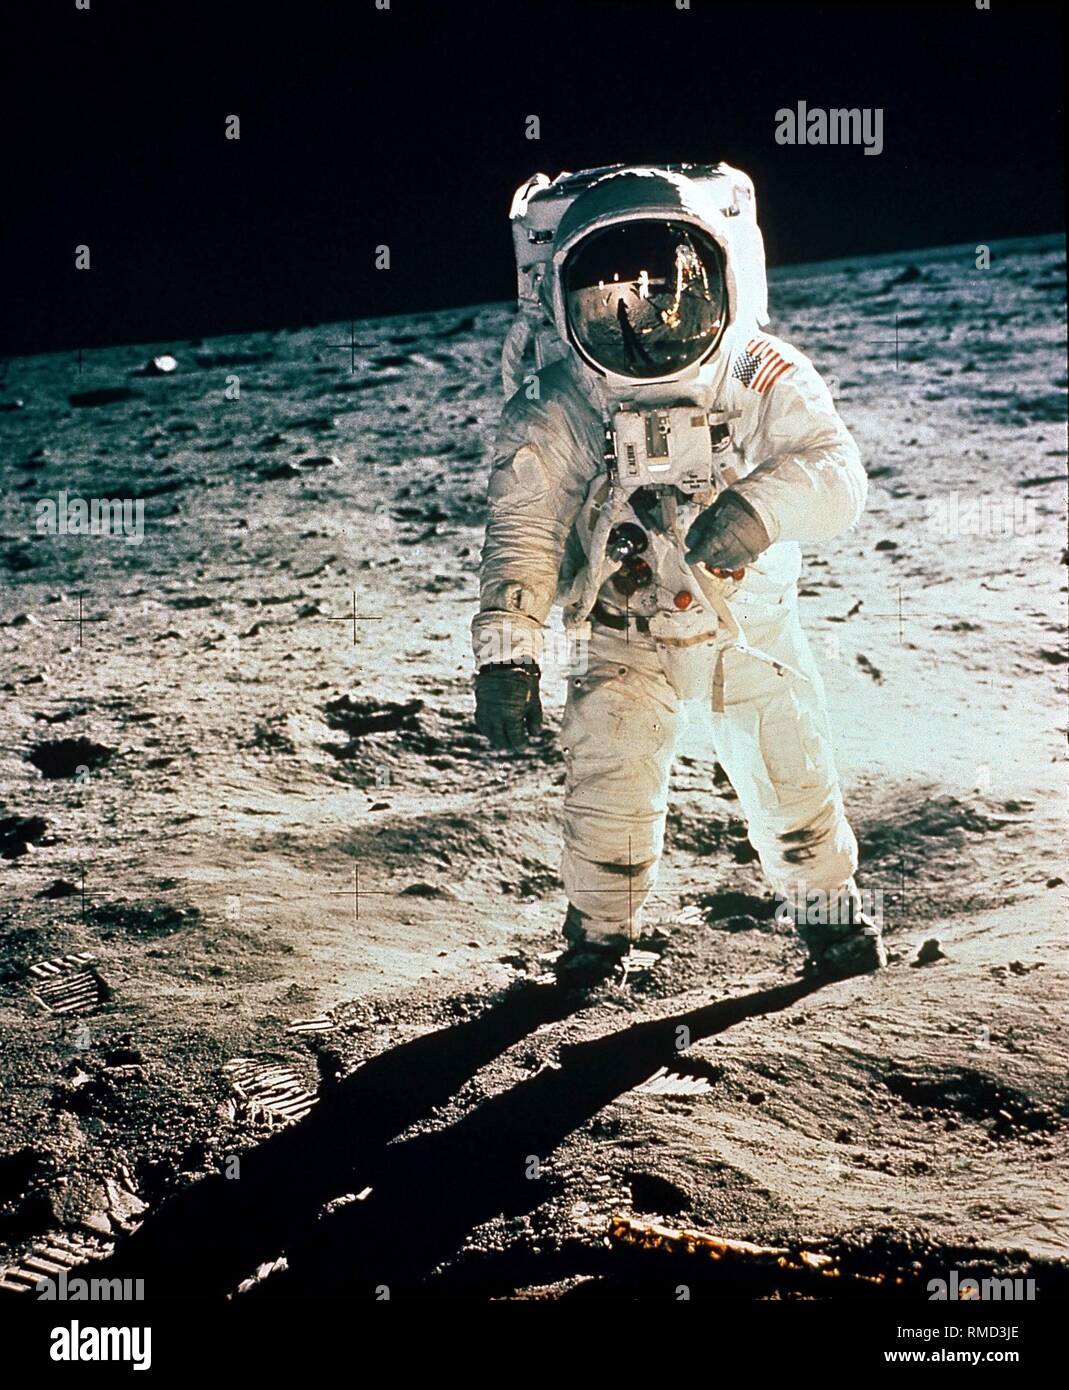 Edwin 'Buzz' Aldrin, the second man on the moon and pilot of the moon ferry 'Eagle', during his walk on the moon. His helmet reflects the moon ferry. Stock Photo